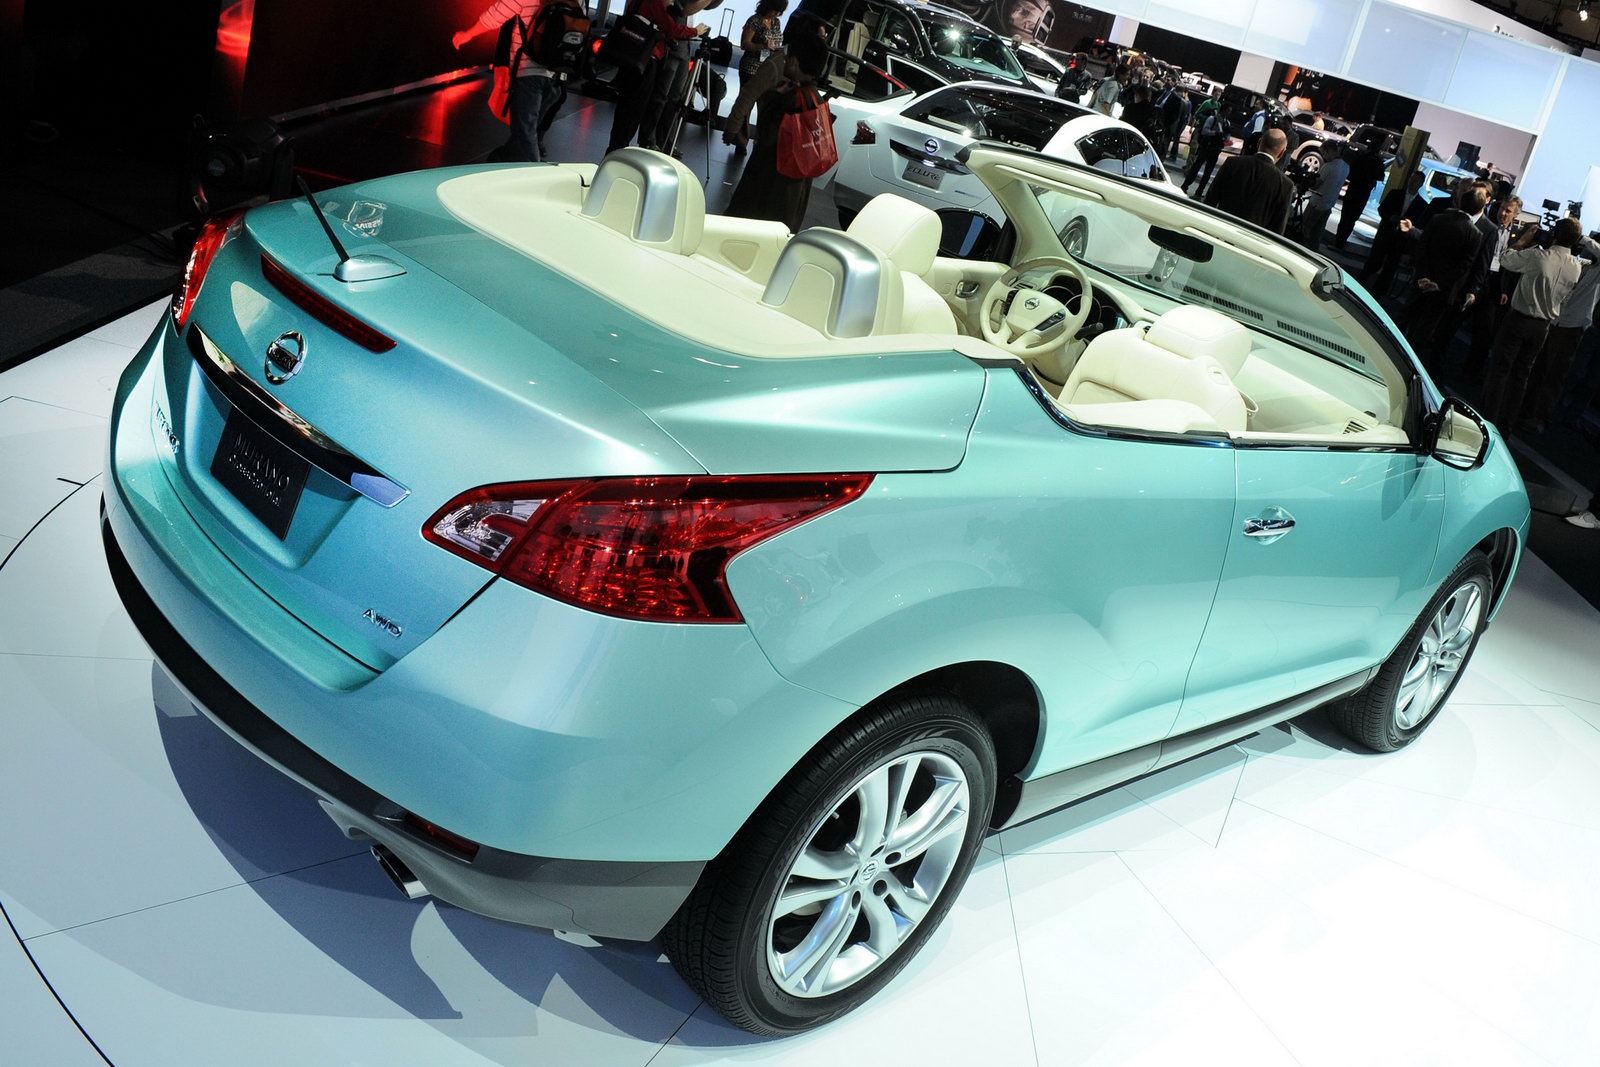 Nissan Murano CrossCabriolet: Live Photos from LA Show Plus Video